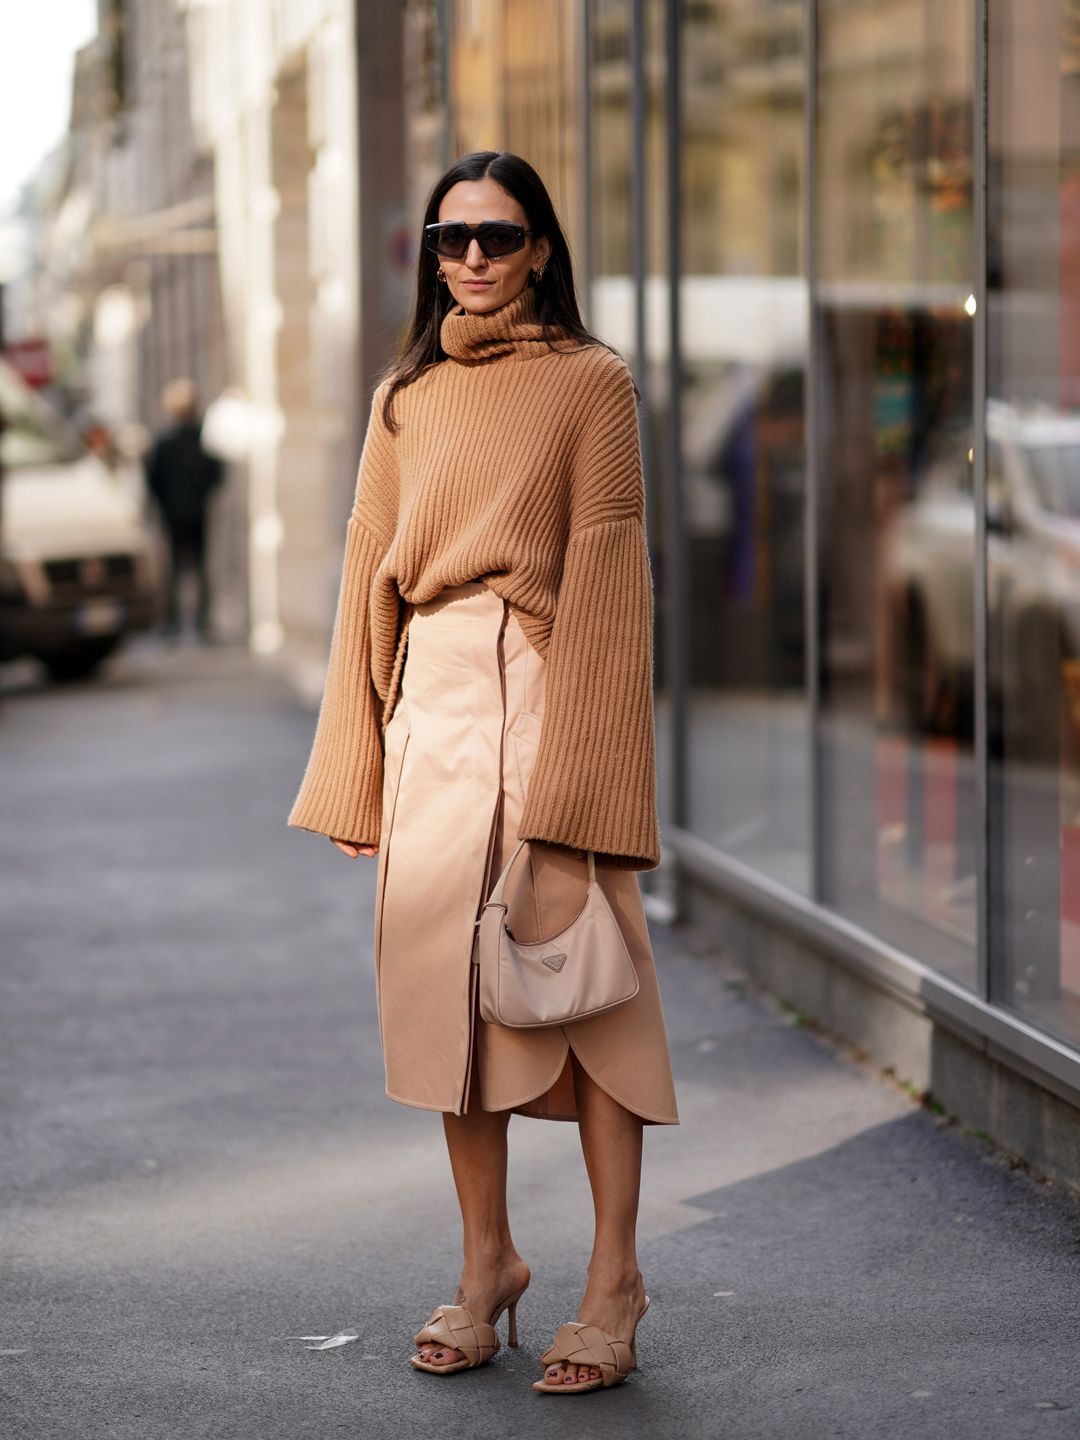 A Milan Fashion Week wearing an oversized jumper with light neutral hues 